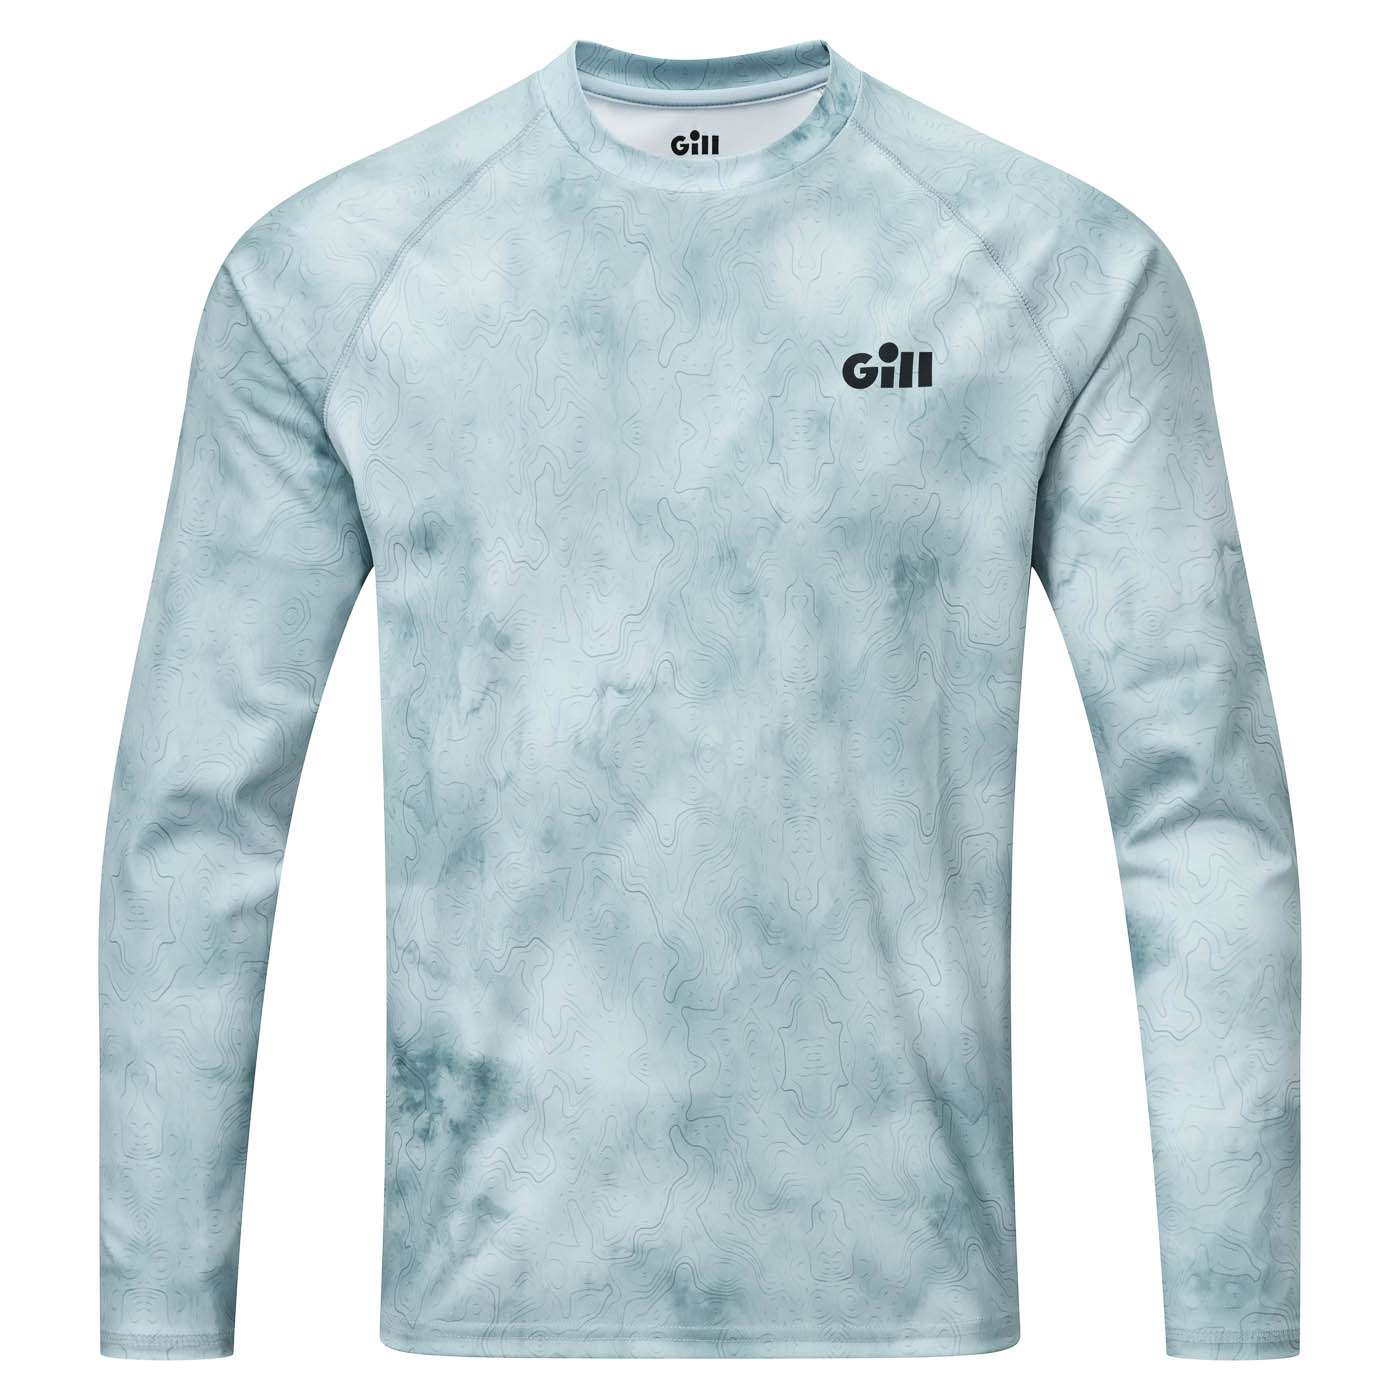 <p><strong>Gill Fishing Men's XPEL Tec Long Sleeve Top</strong></p><p>The XPEL Tec Long Sleeve is a high-performance shirt built to keep the wearer dry, cool and clean all summer. Featuring Gillâs exclusive plant-based XPEL fabric technology, this breathable and moisture wicking shirt is guaranteed to repel water, oil, blood and other muck while naturally controlling odor. 50+ UV protection. Updated fit. Available in 11 new colors: Spicy Red, Twilight, Pewter, Citron, Shadow Camo, Pool Camo, Pewter Camo, Ice Camo, Glacier Camo, White. $49.95. <a href=